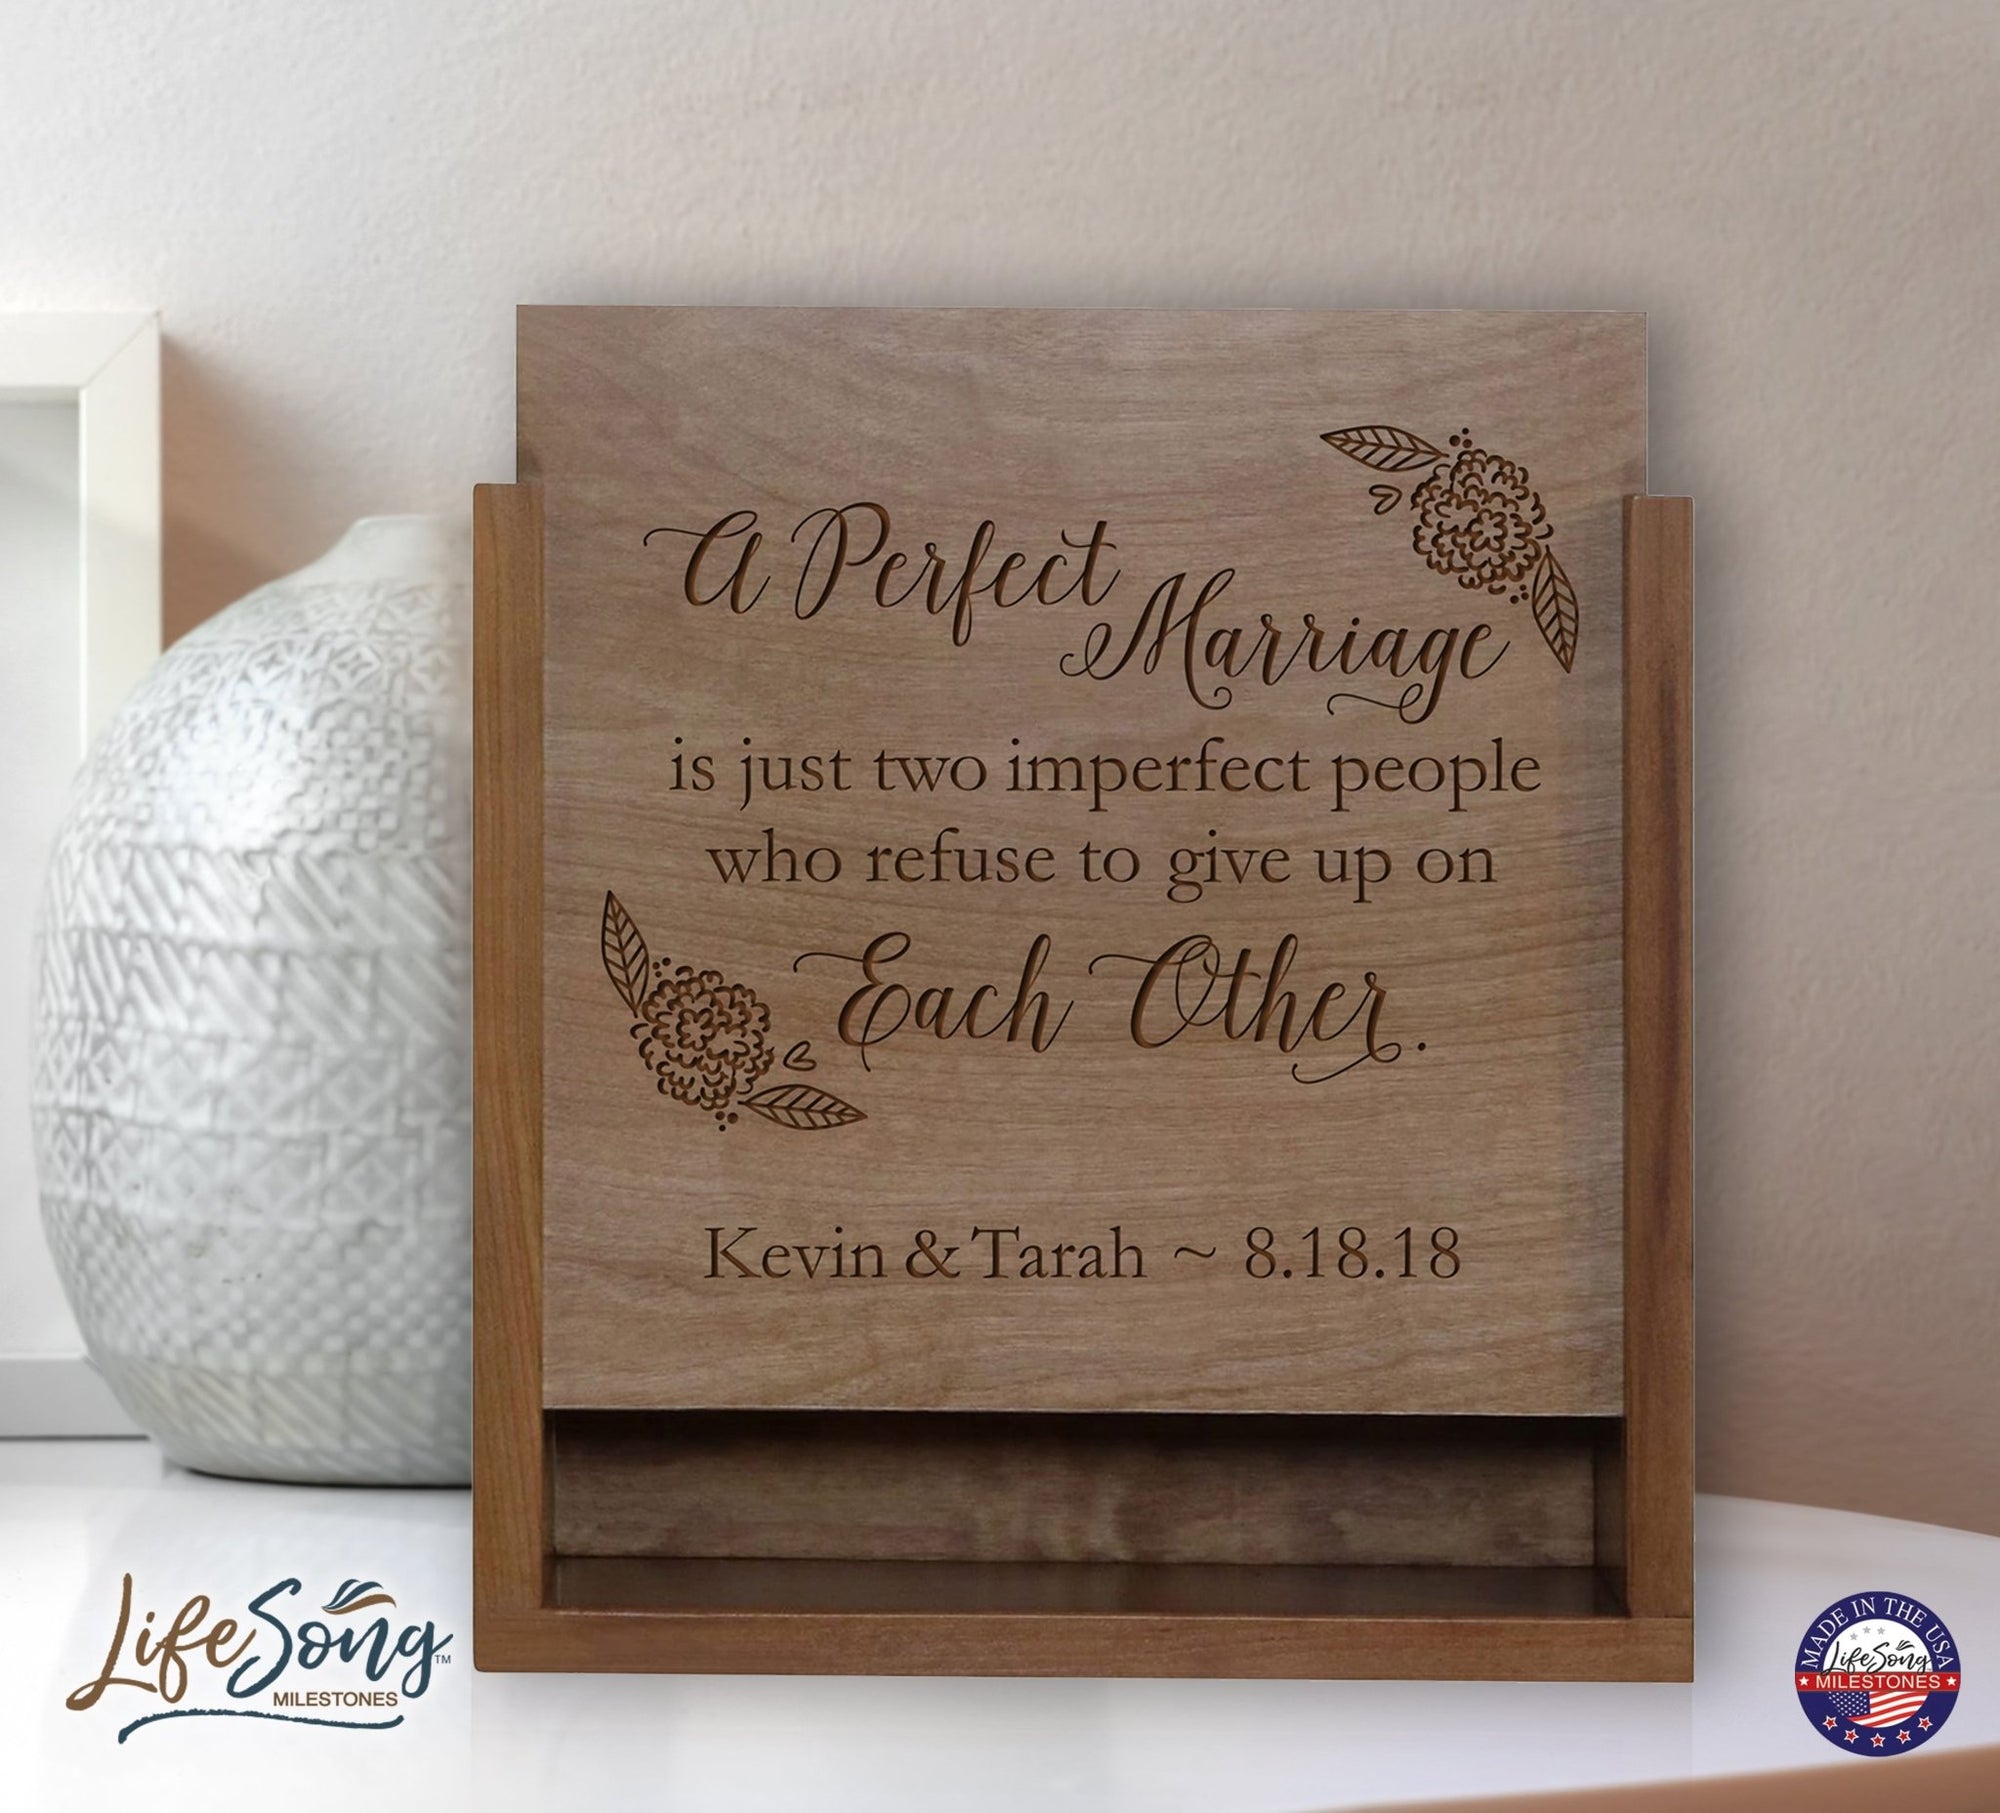 Personalized A Perfect Marriage Wooden Wedding Card Box with Sliding Top - LifeSong Milestones